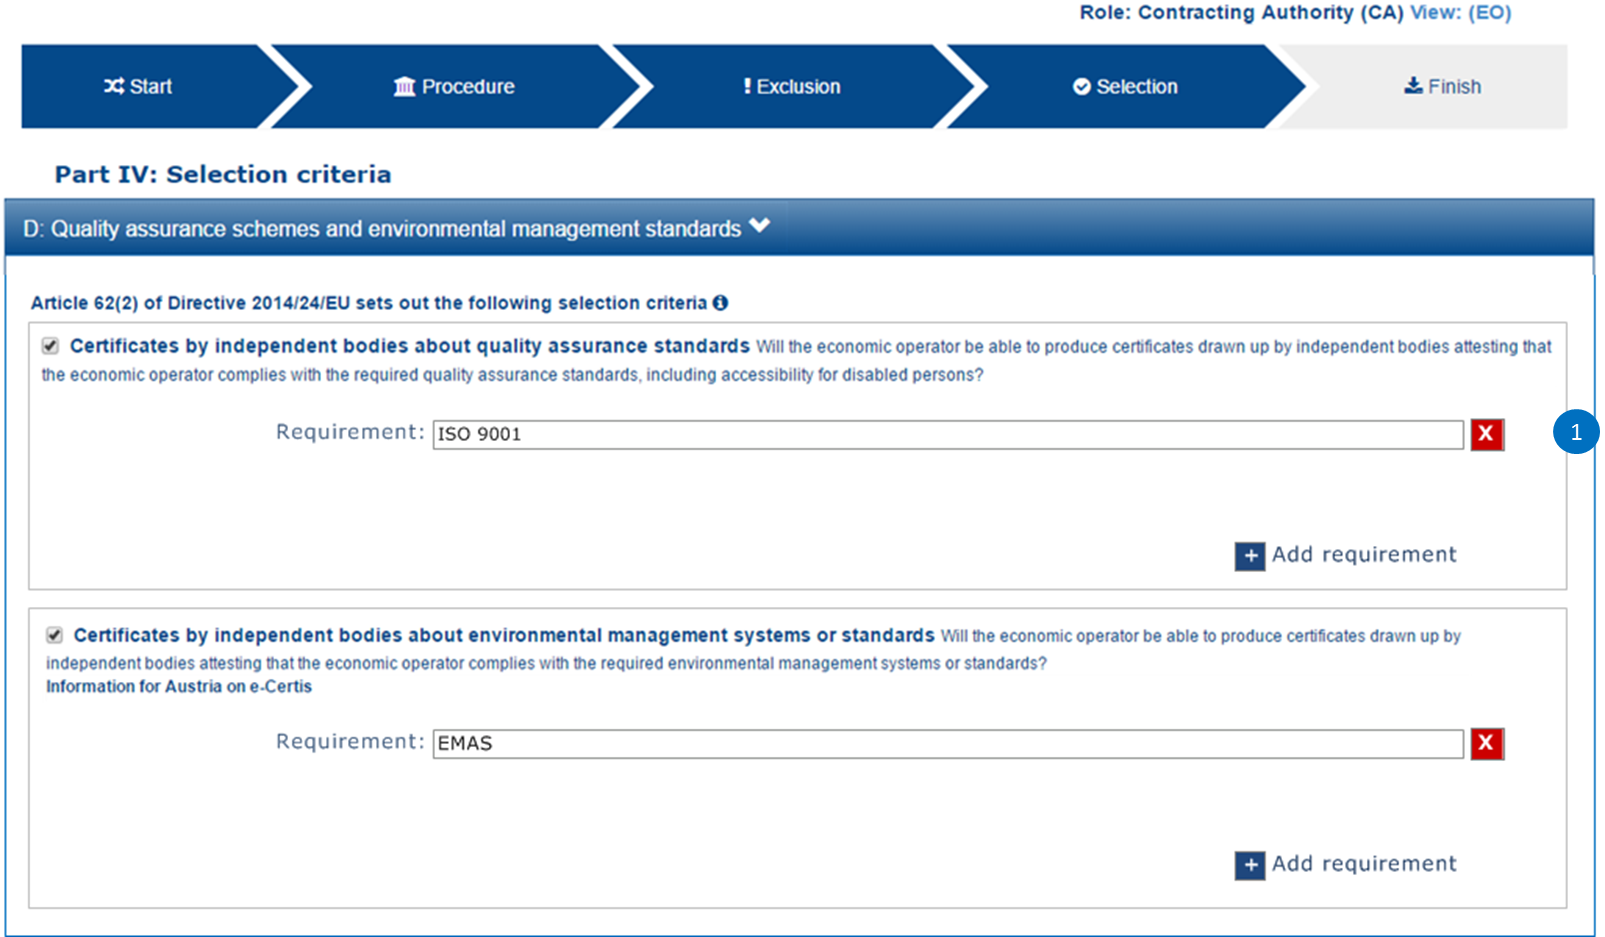 Extended 'Quality Assurance schemes and environmental management standards' CA mock-up